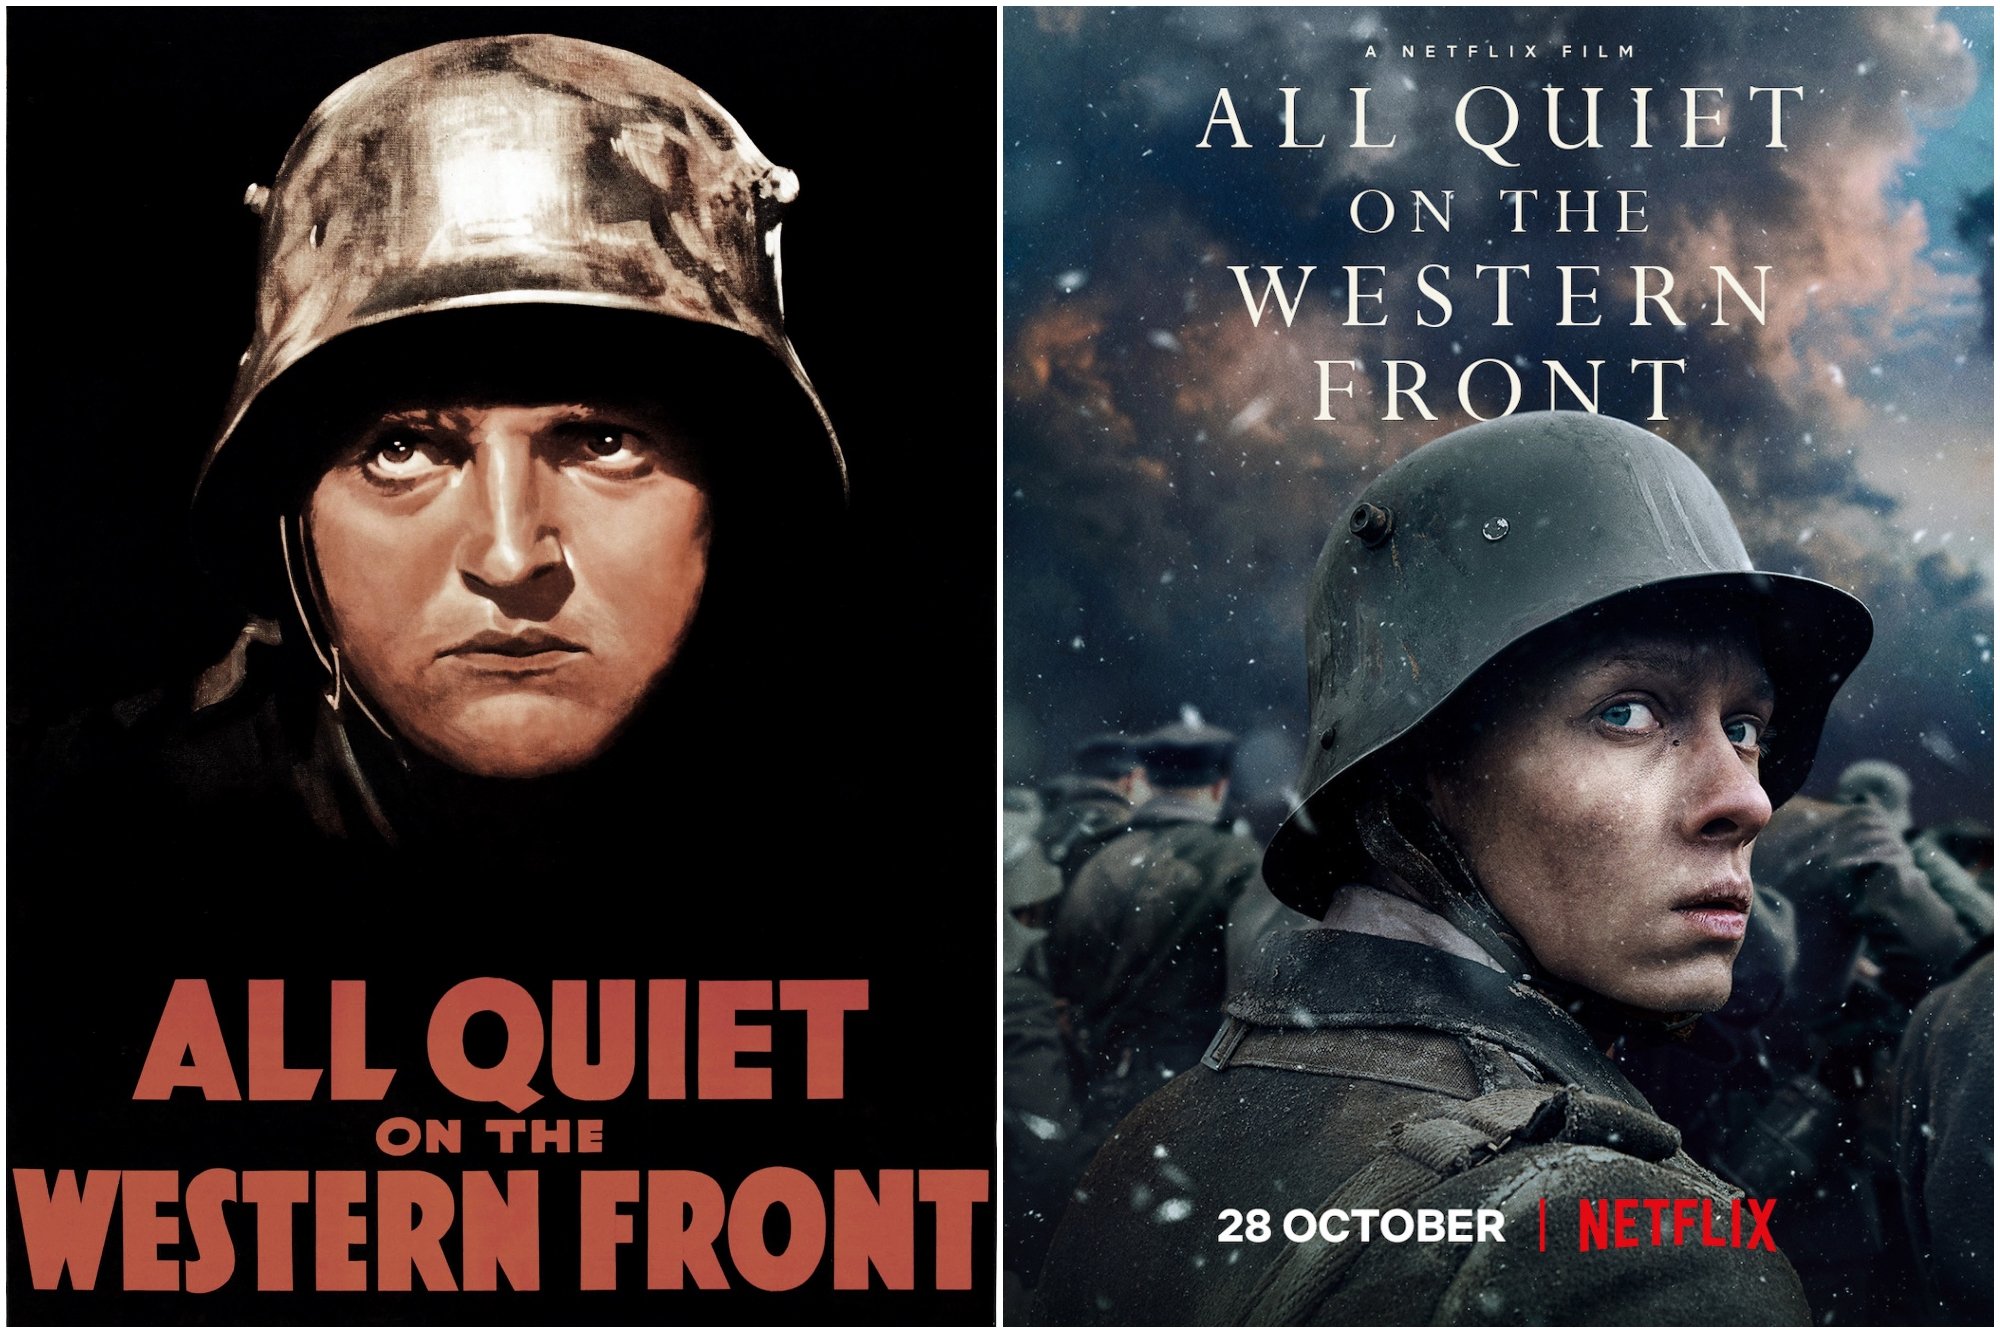 Explained: Why All Quiet on the Western Front is one of the great